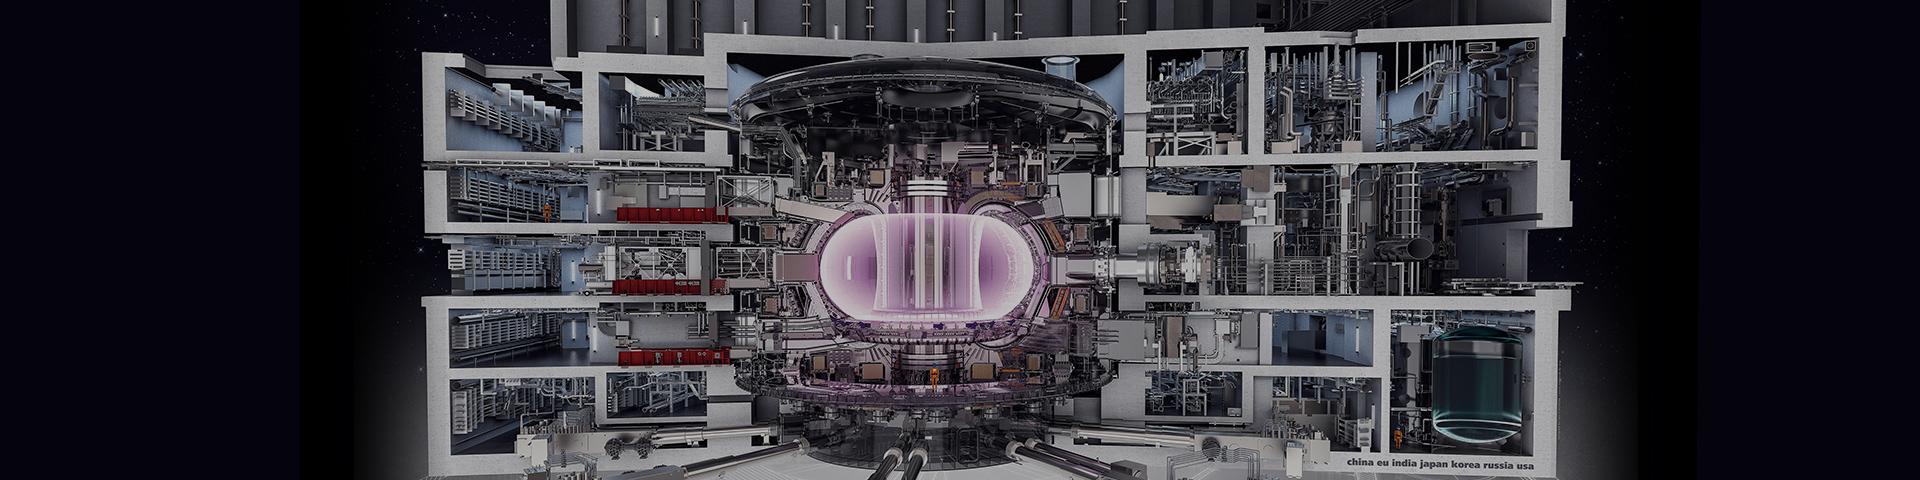 Operating ITER and its overview (conceptual) ©ITER Organization